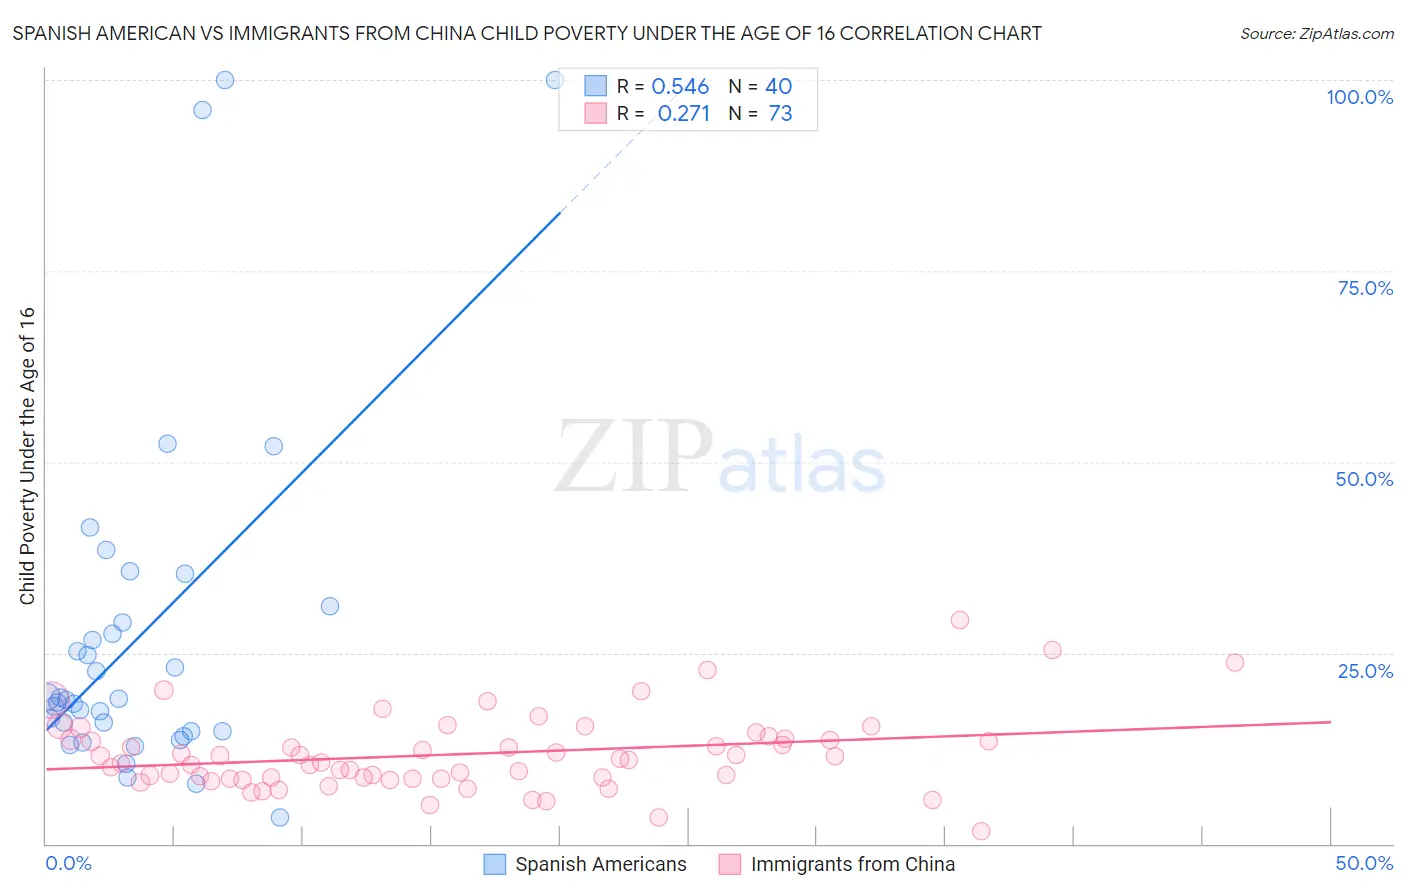 Spanish American vs Immigrants from China Child Poverty Under the Age of 16